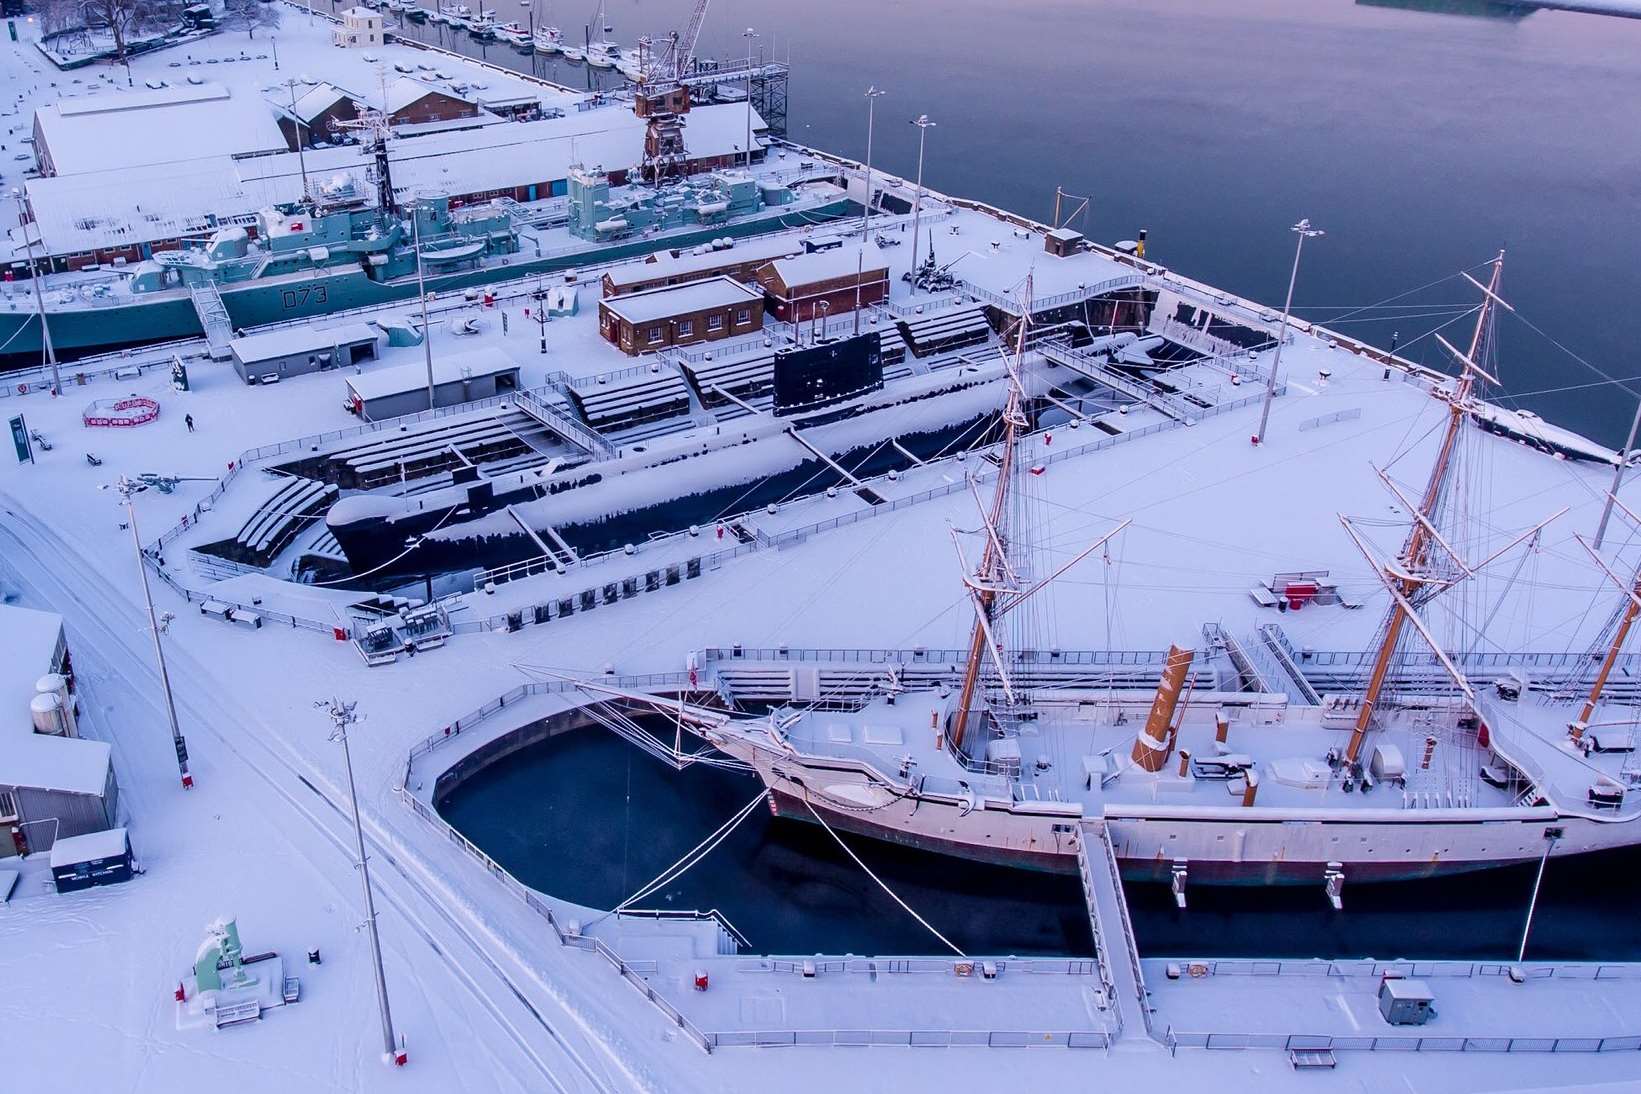 Chatham Historic Dockyard has been affected by the severe weather Picture: @pictures_from_the_air